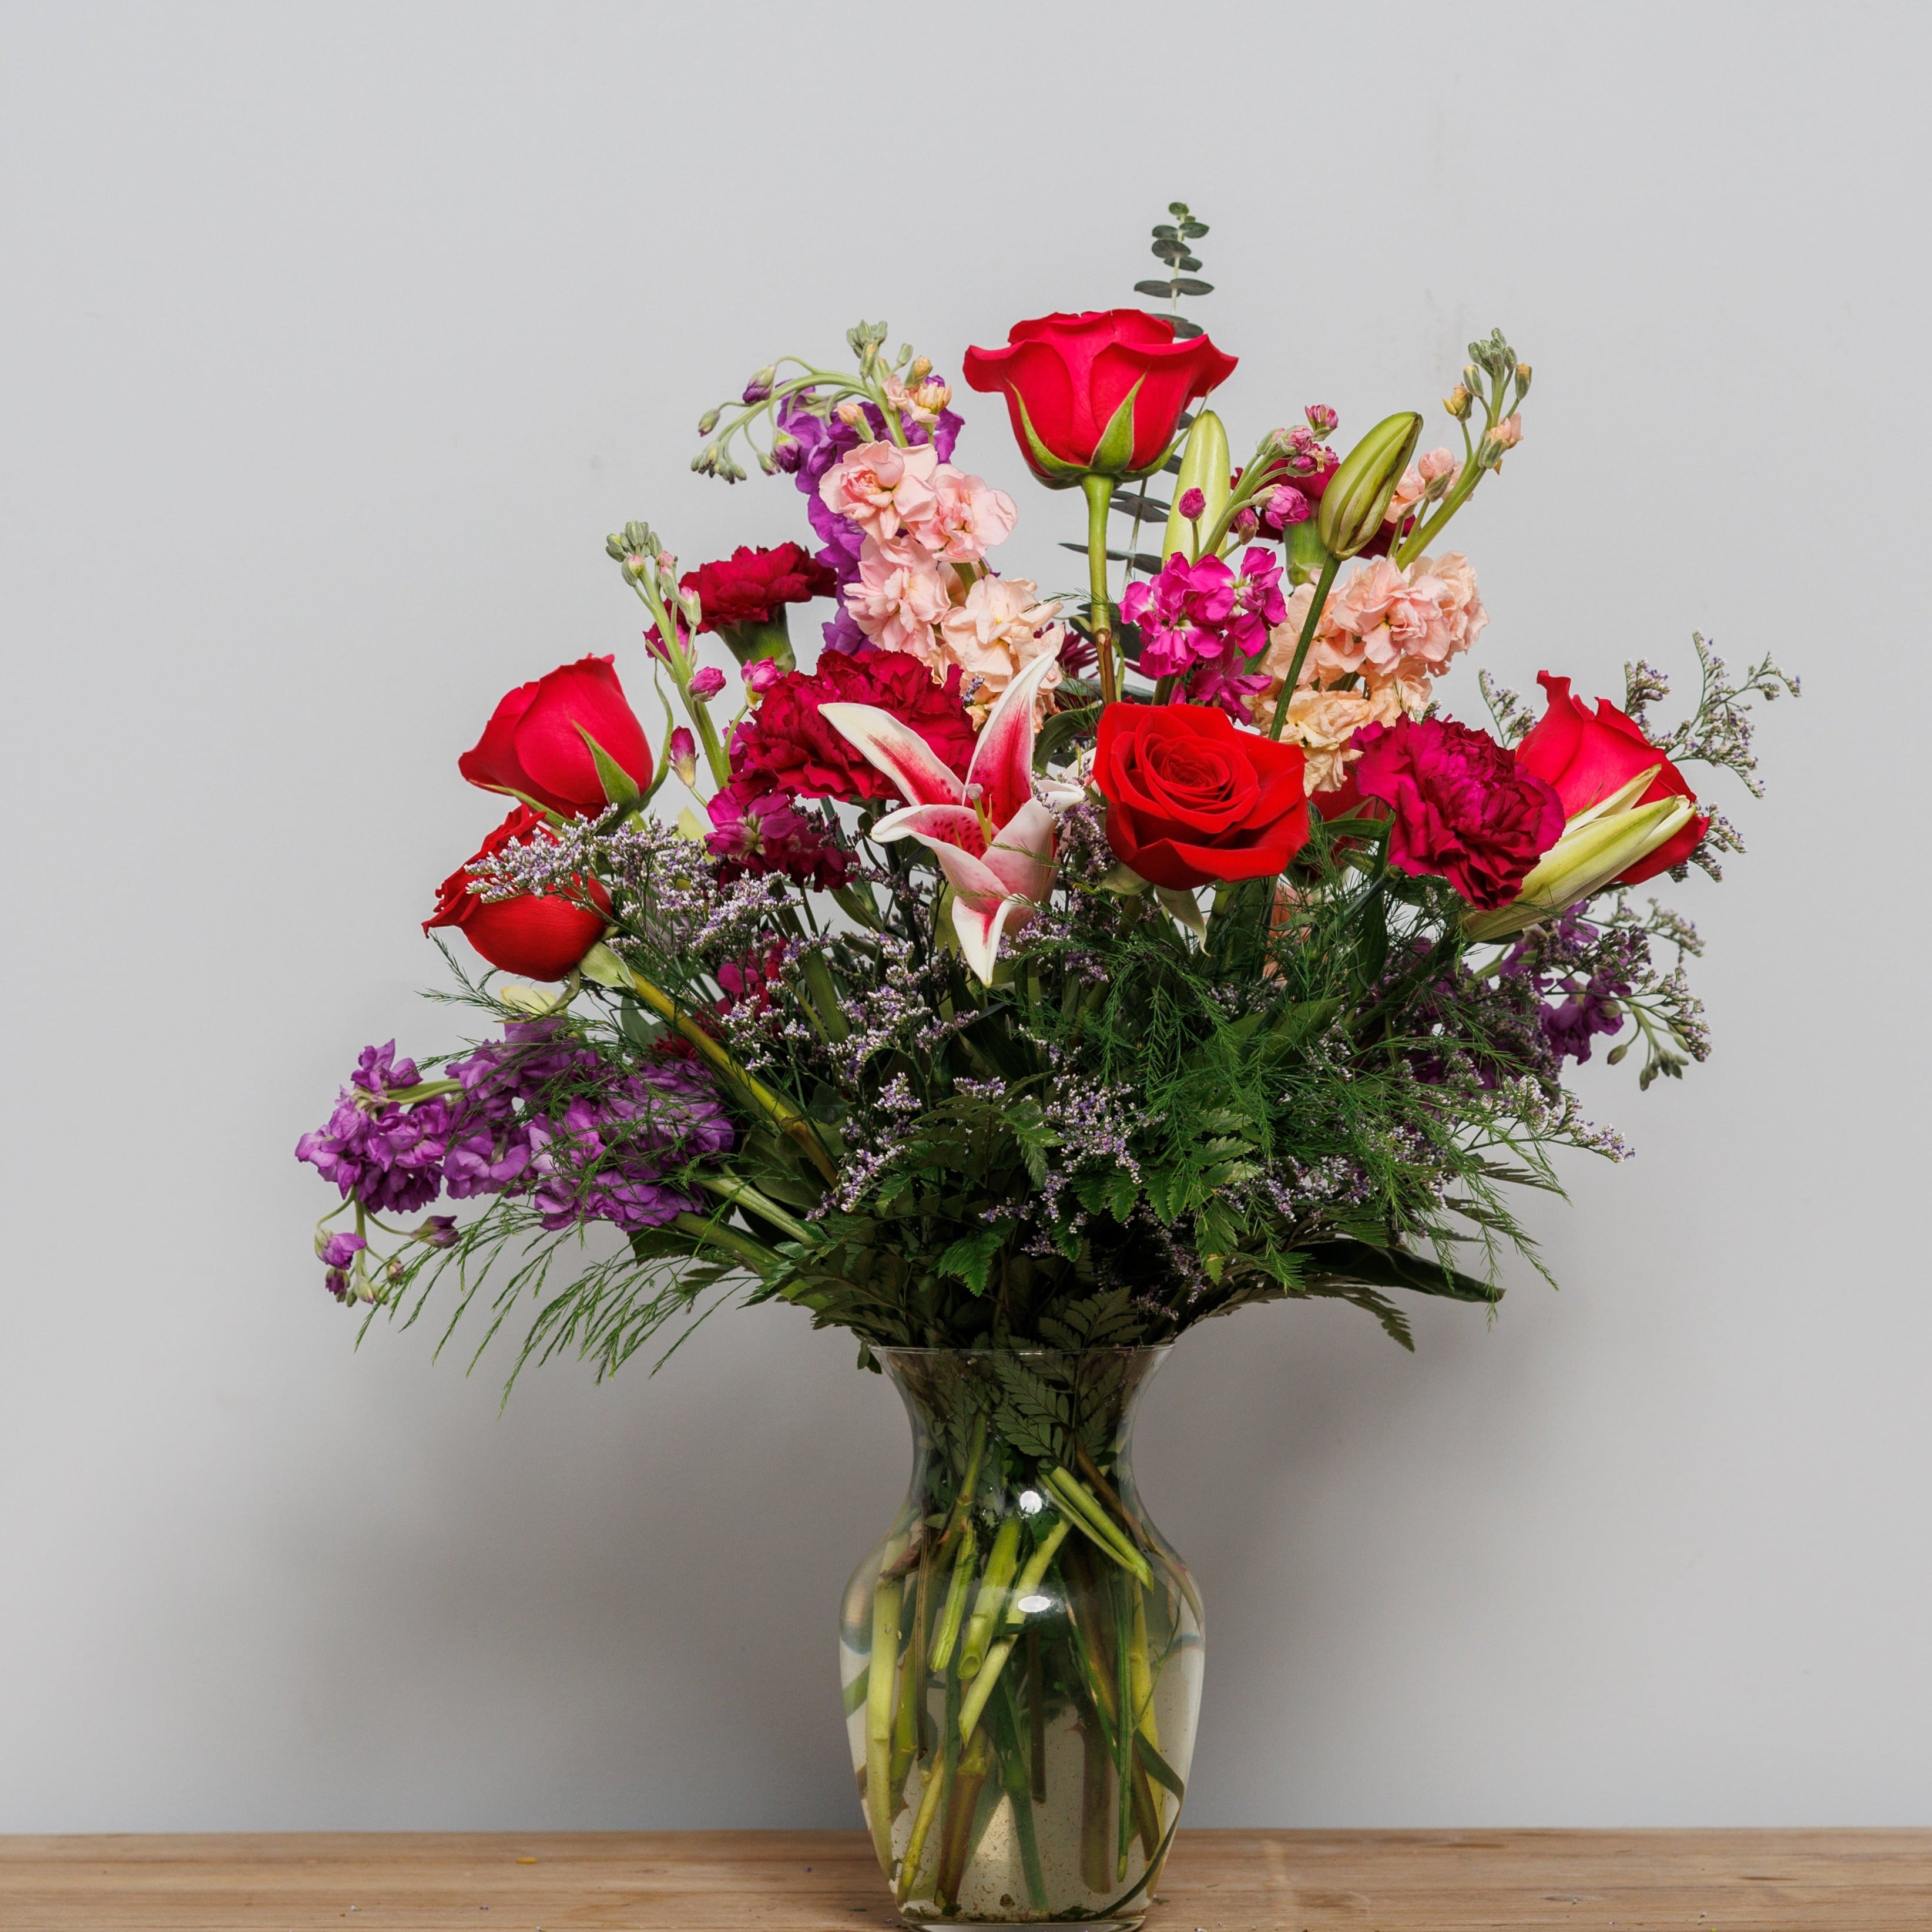 A mixed bouquet of red roses, purple stock, stargazer lilies and purple carnations.